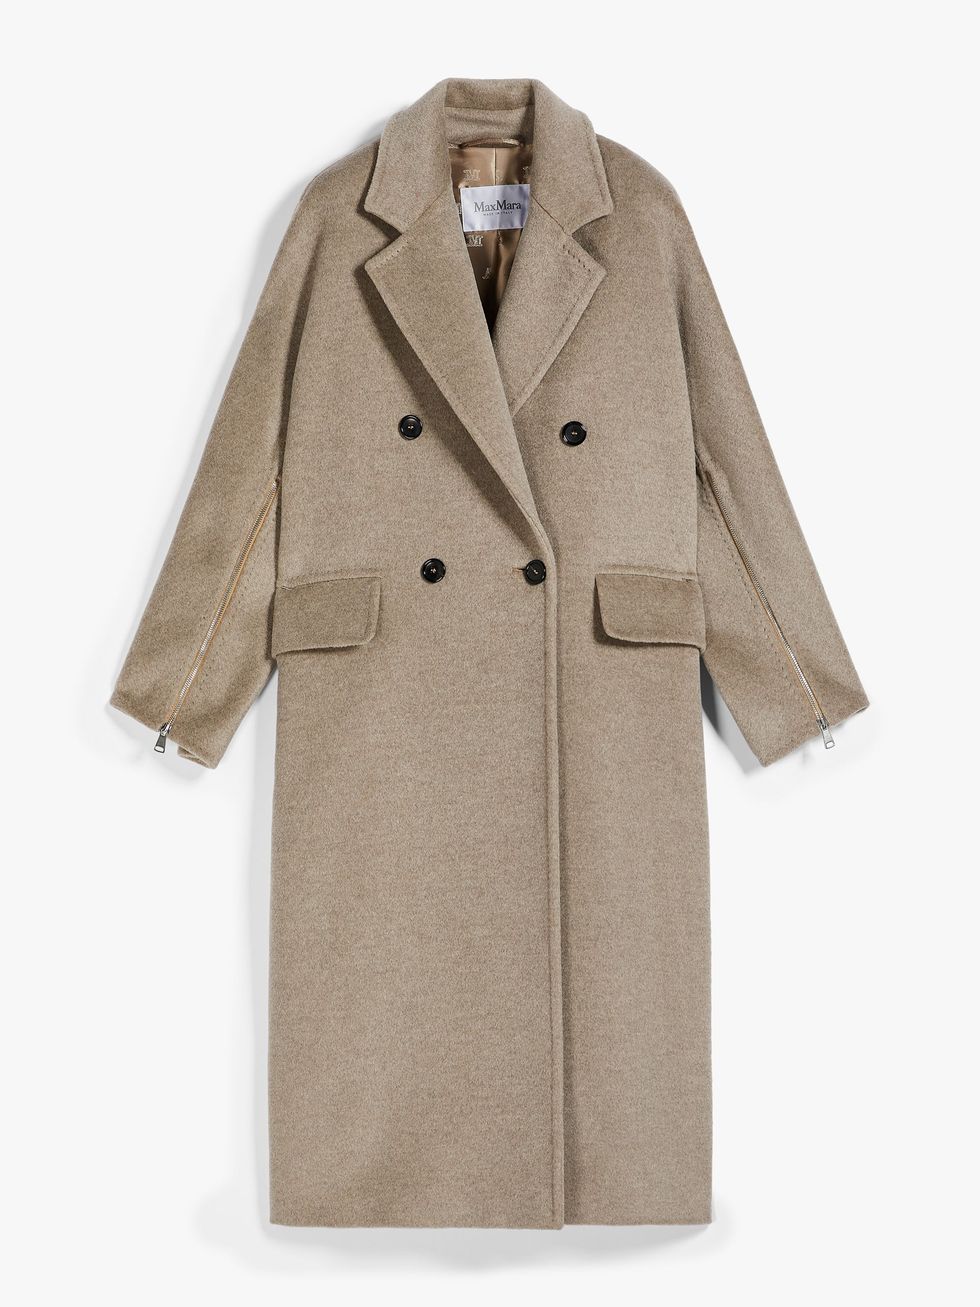 Max Mara's Iconic Coats Are Built to Layer